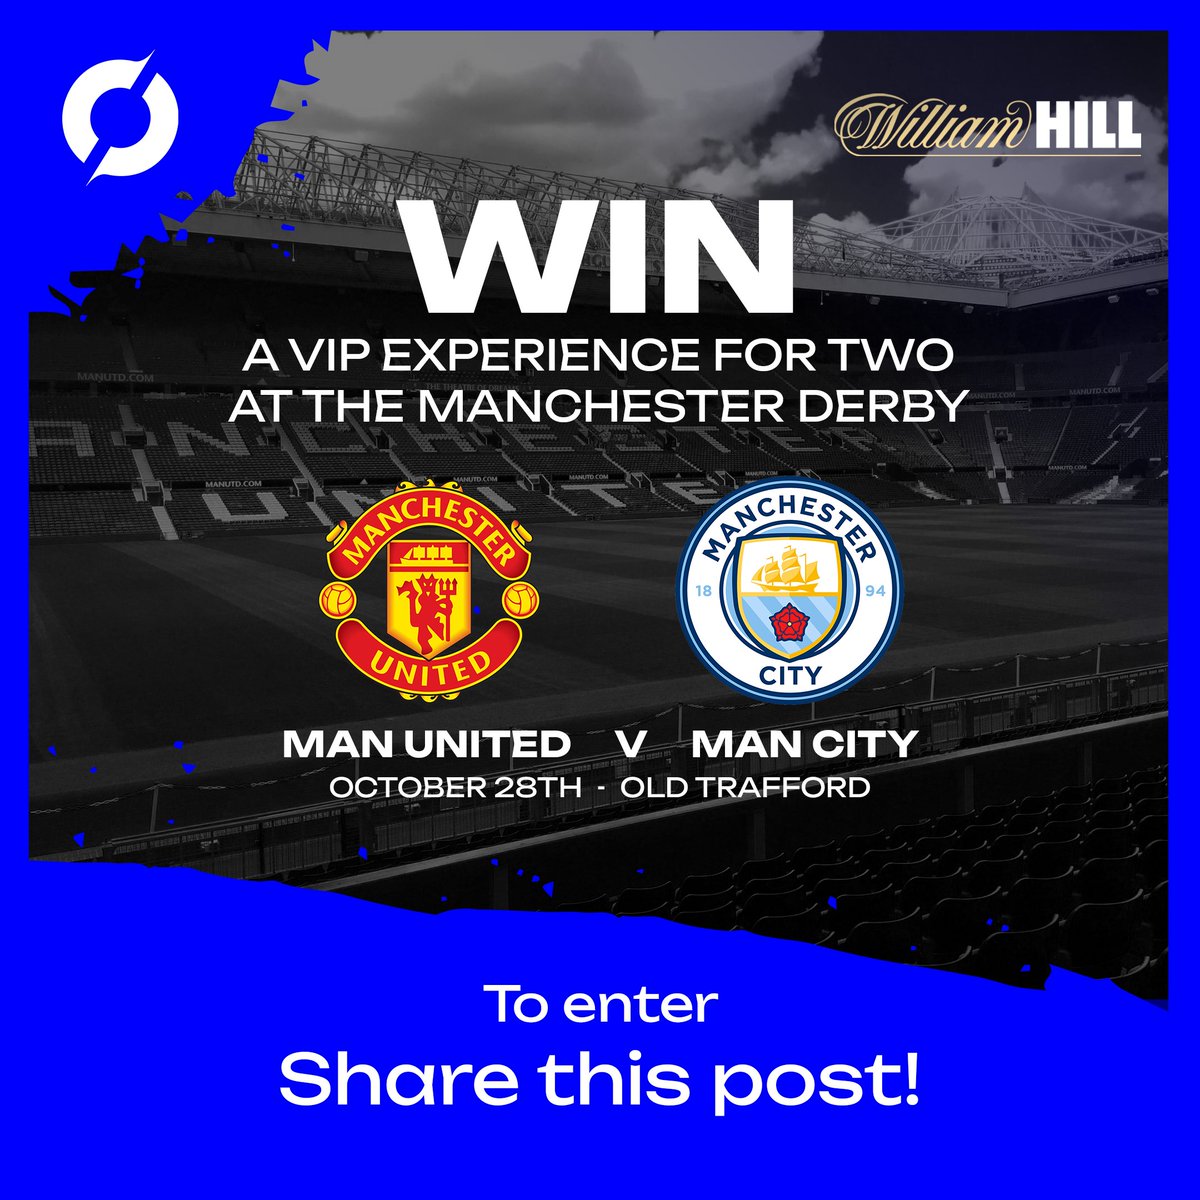 🚨Competition time!🚨 We've teamed up with @williamhillire to give away a trip to the Manchester Derby! Simply like and repost to win. **Winner announced Monday 25th of September!** #KnowTheGame